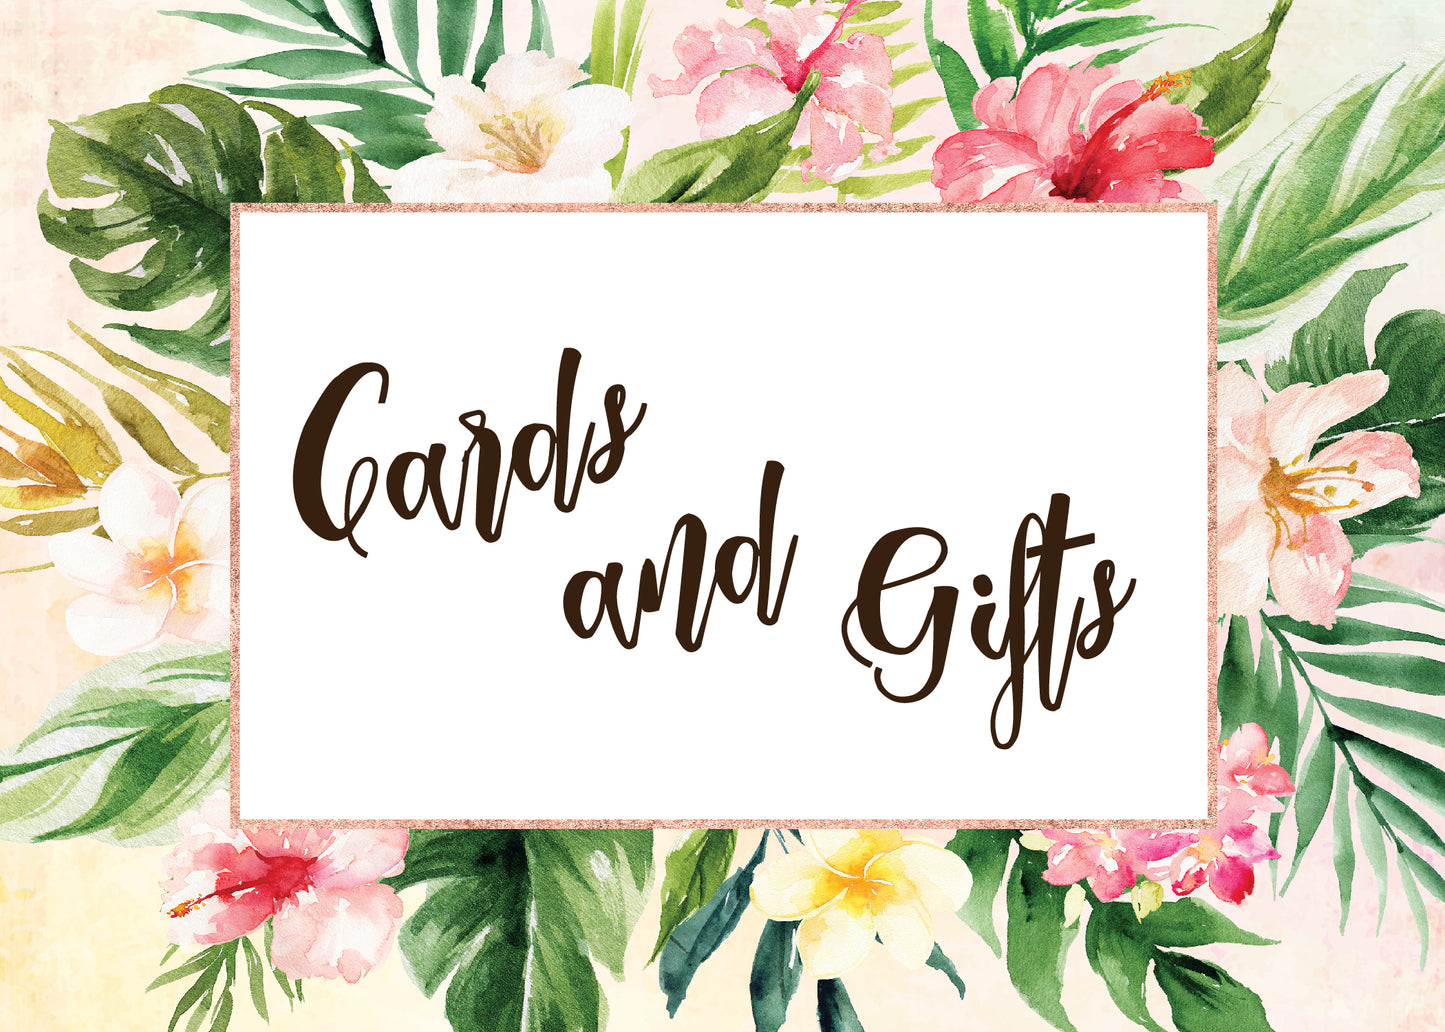 Tropical Floral Watercolor Beach Destination "Cards and Gifts" 5x7 Sign Digital "Instant Download" - 'TROPICAL LUSH"